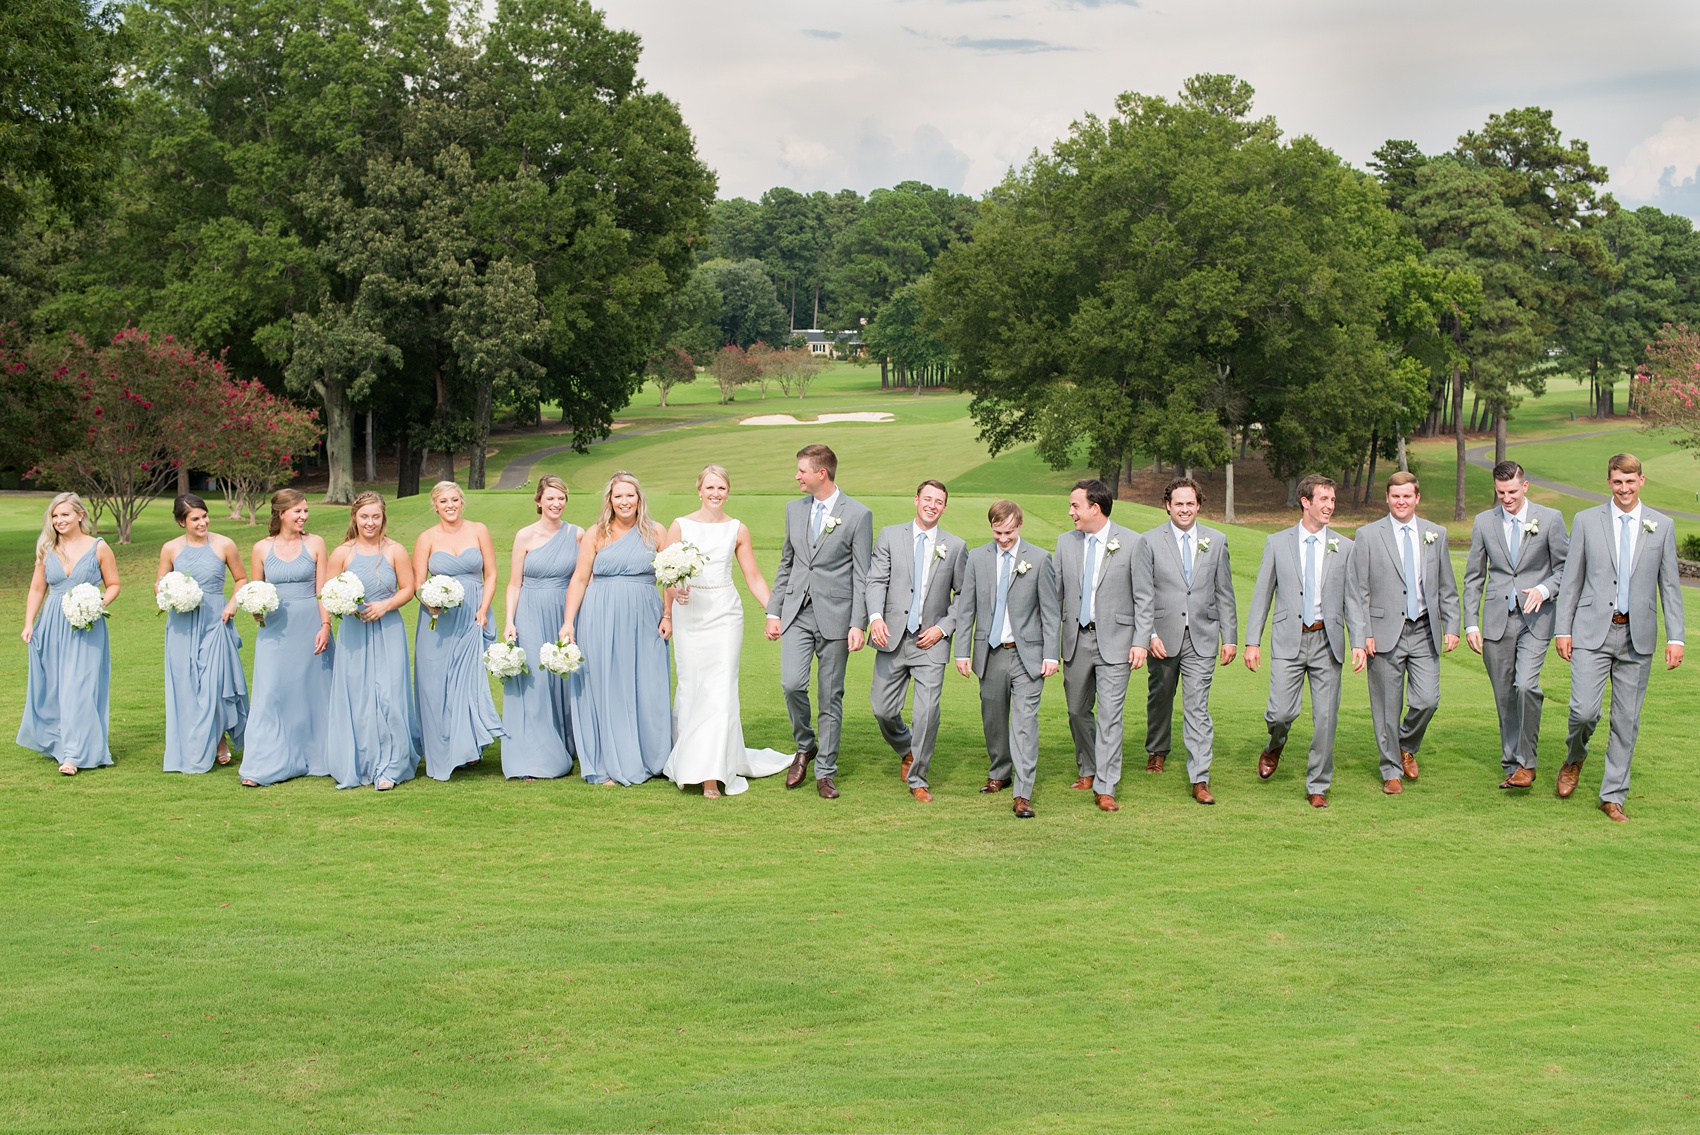 Mikkel Paige Photography captures Croasdaile Country Club wedding photos during a summer celebration. This golf course venue in Durham, North Carolina, is beautiful for photography outdoors, especially with a pretty bridal party in dusty blue and glowing bride! Click through for more from the day! #DurhamWedding #MikkelPaige #Durhamvenues #NorthCarolinawedding #southernwedding #GolfCourseWedding #CountryClubWedding #DustyBlueBridesmaids